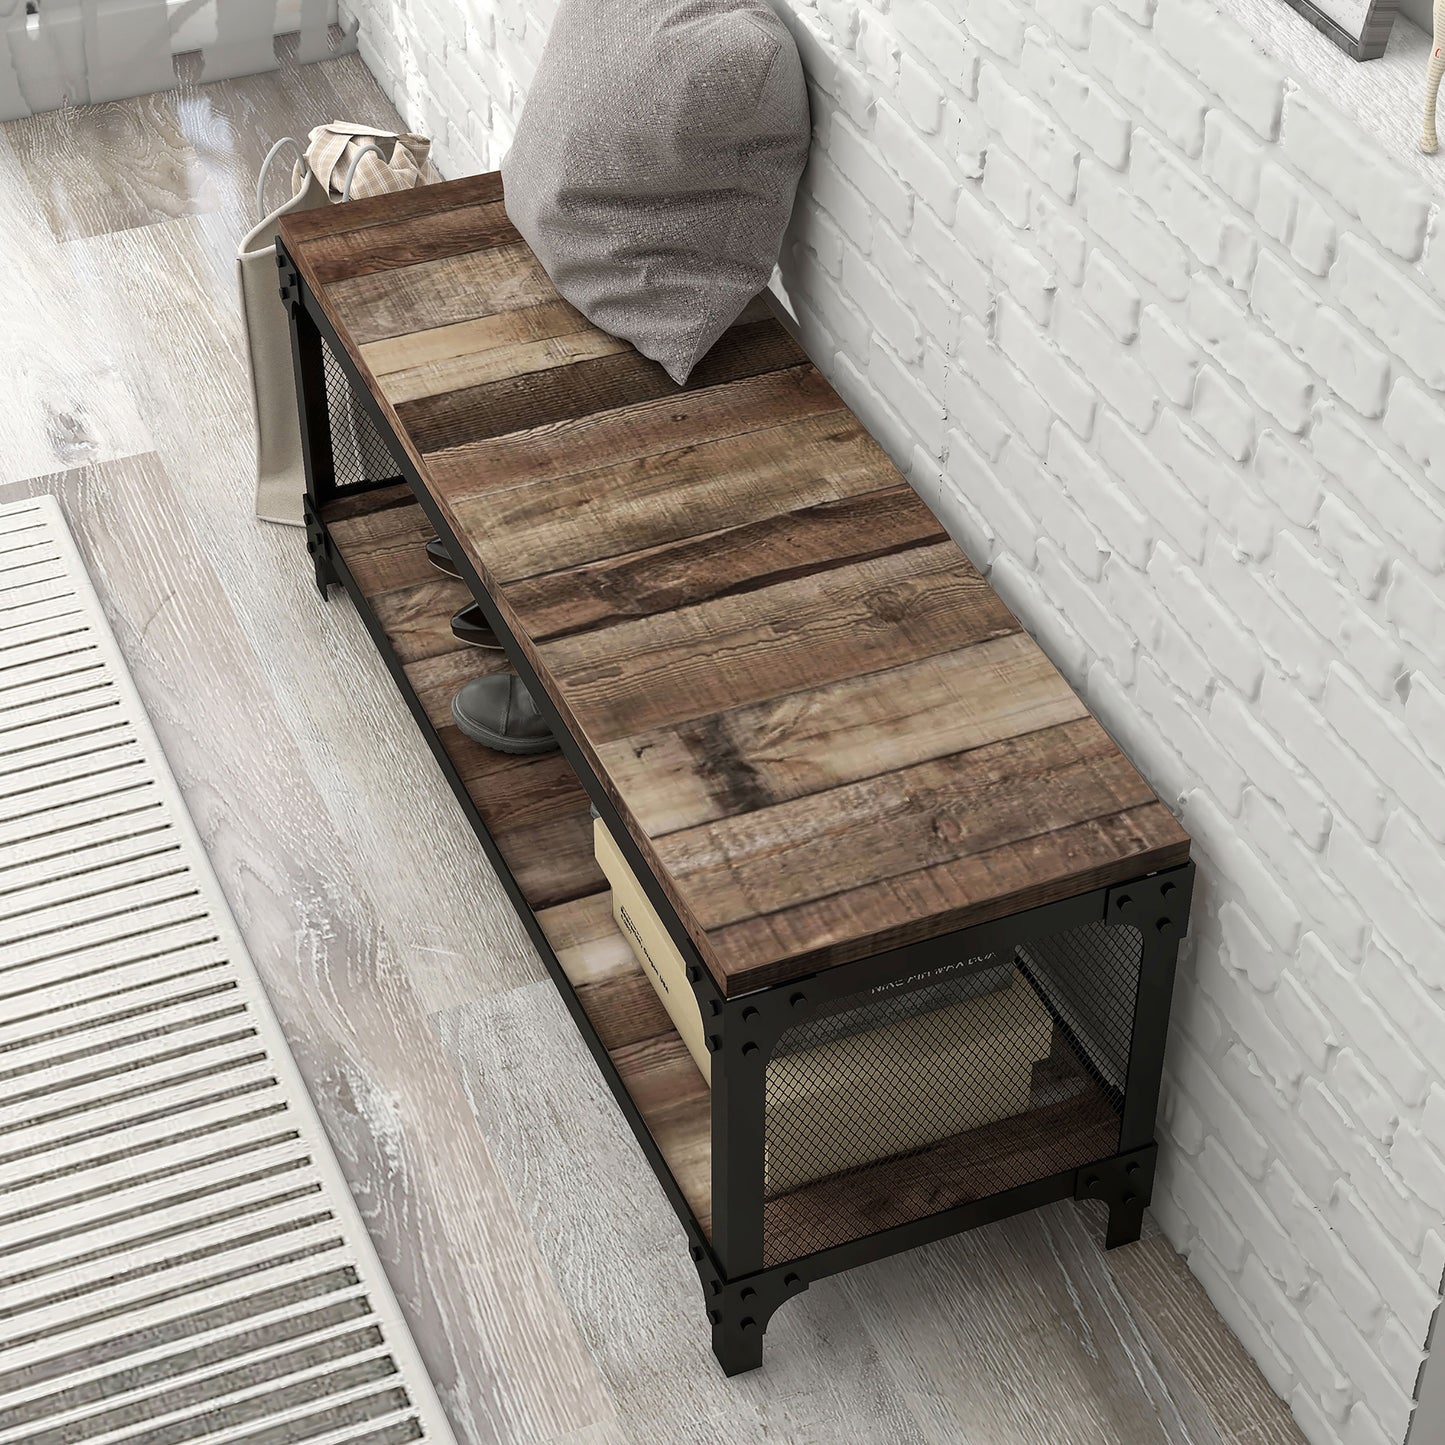 Left angled bird's eye view of an industrial reclaimed barnwood shoe storage bench with a shelf in a living area with accessories